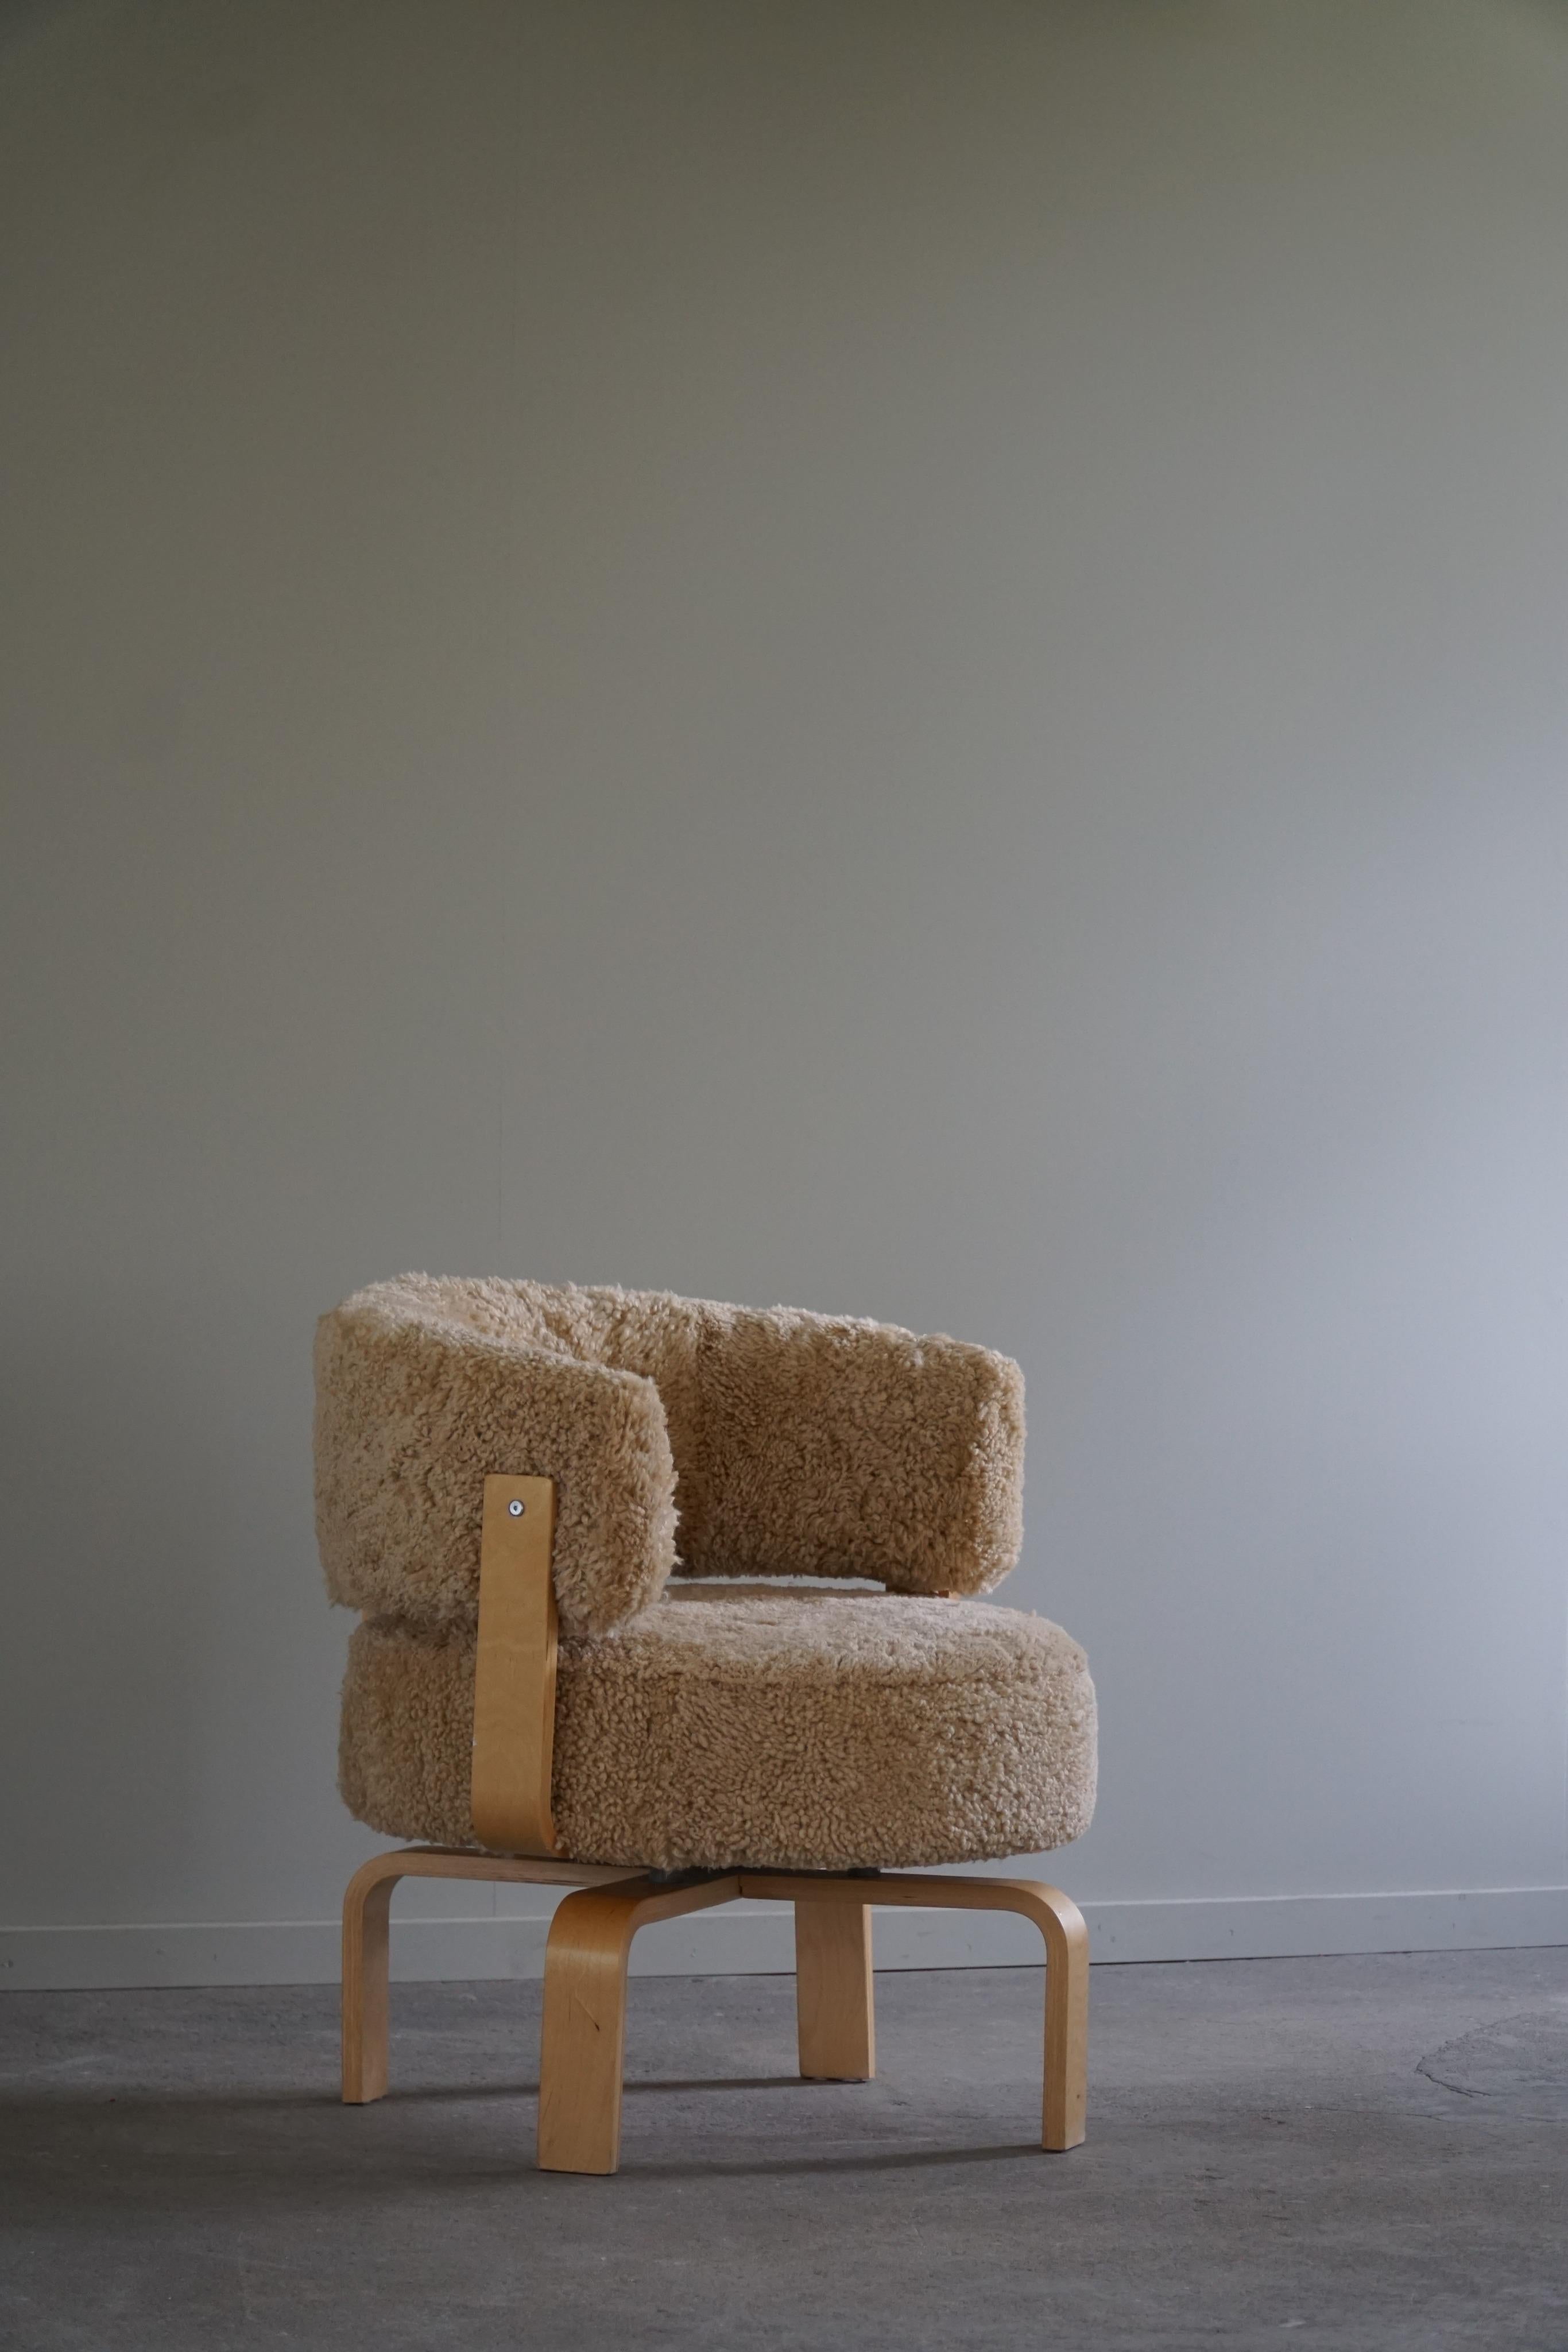 A lovely cosy 360 degree swivel armchair, reupholstered in a great quality shearling lambswool, frame and legs made of bented beechwood. Designed by Carina Bengs for Ikea in 2004. Model “Fidene”, out of production today. 

Sold individually and as